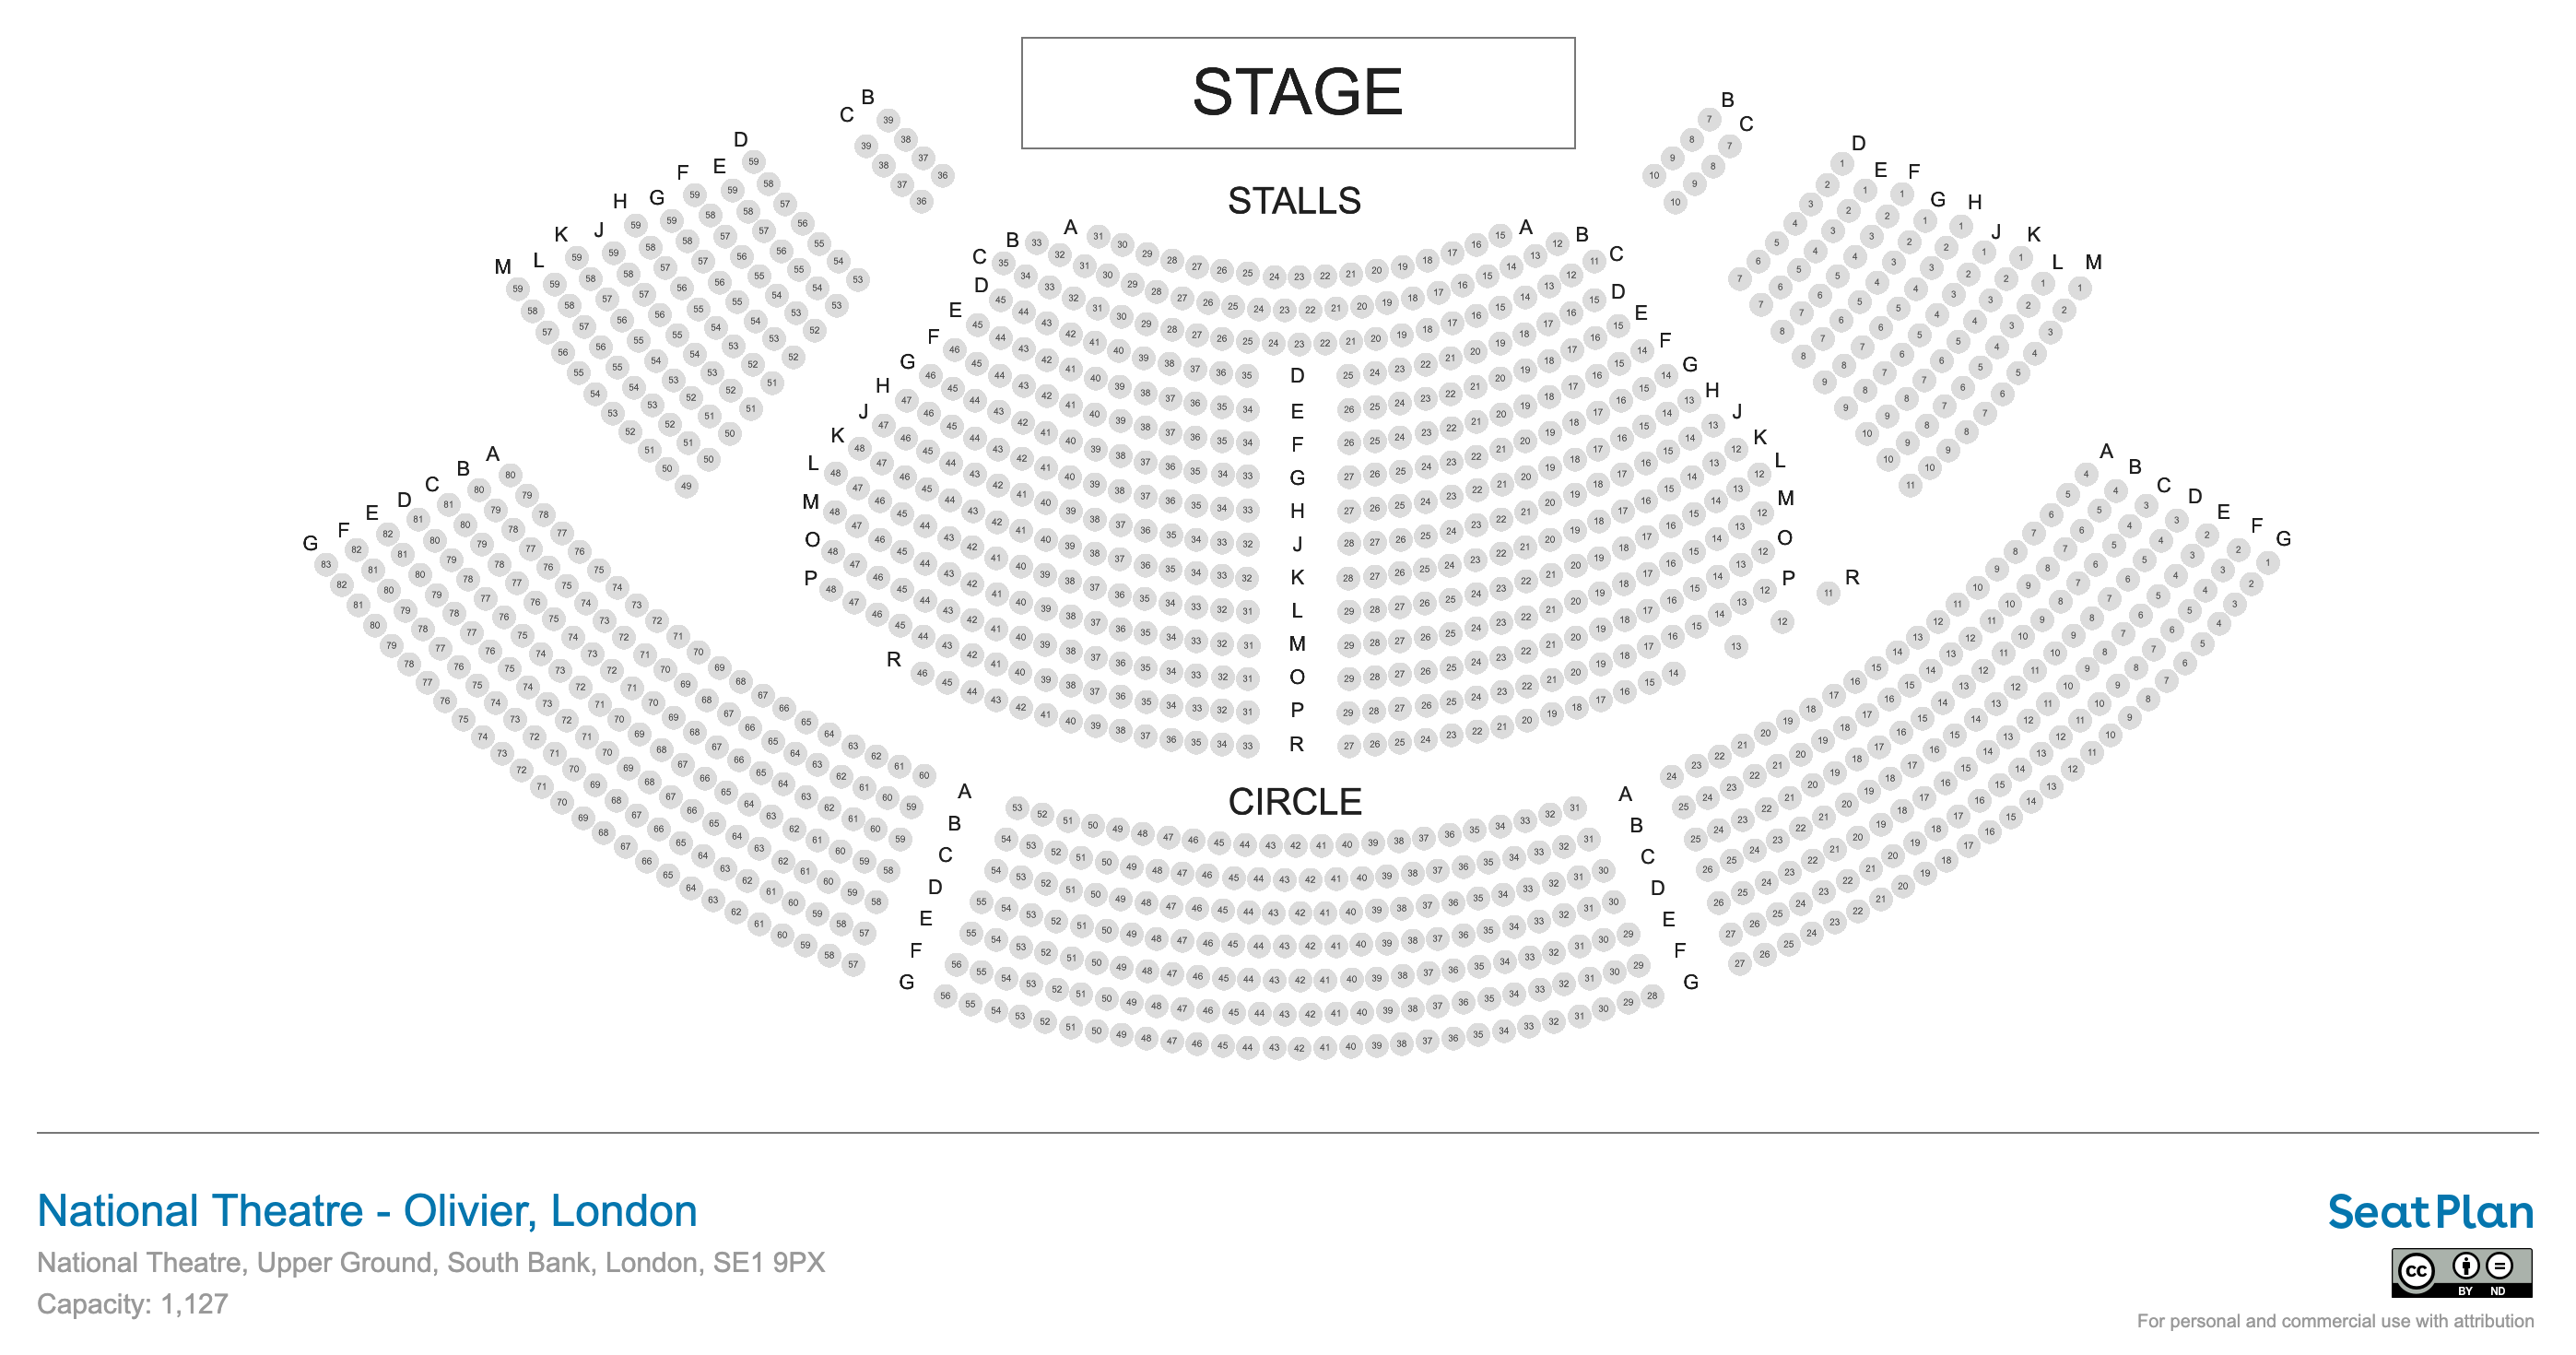 National Theatre - Olivier Seating Plan